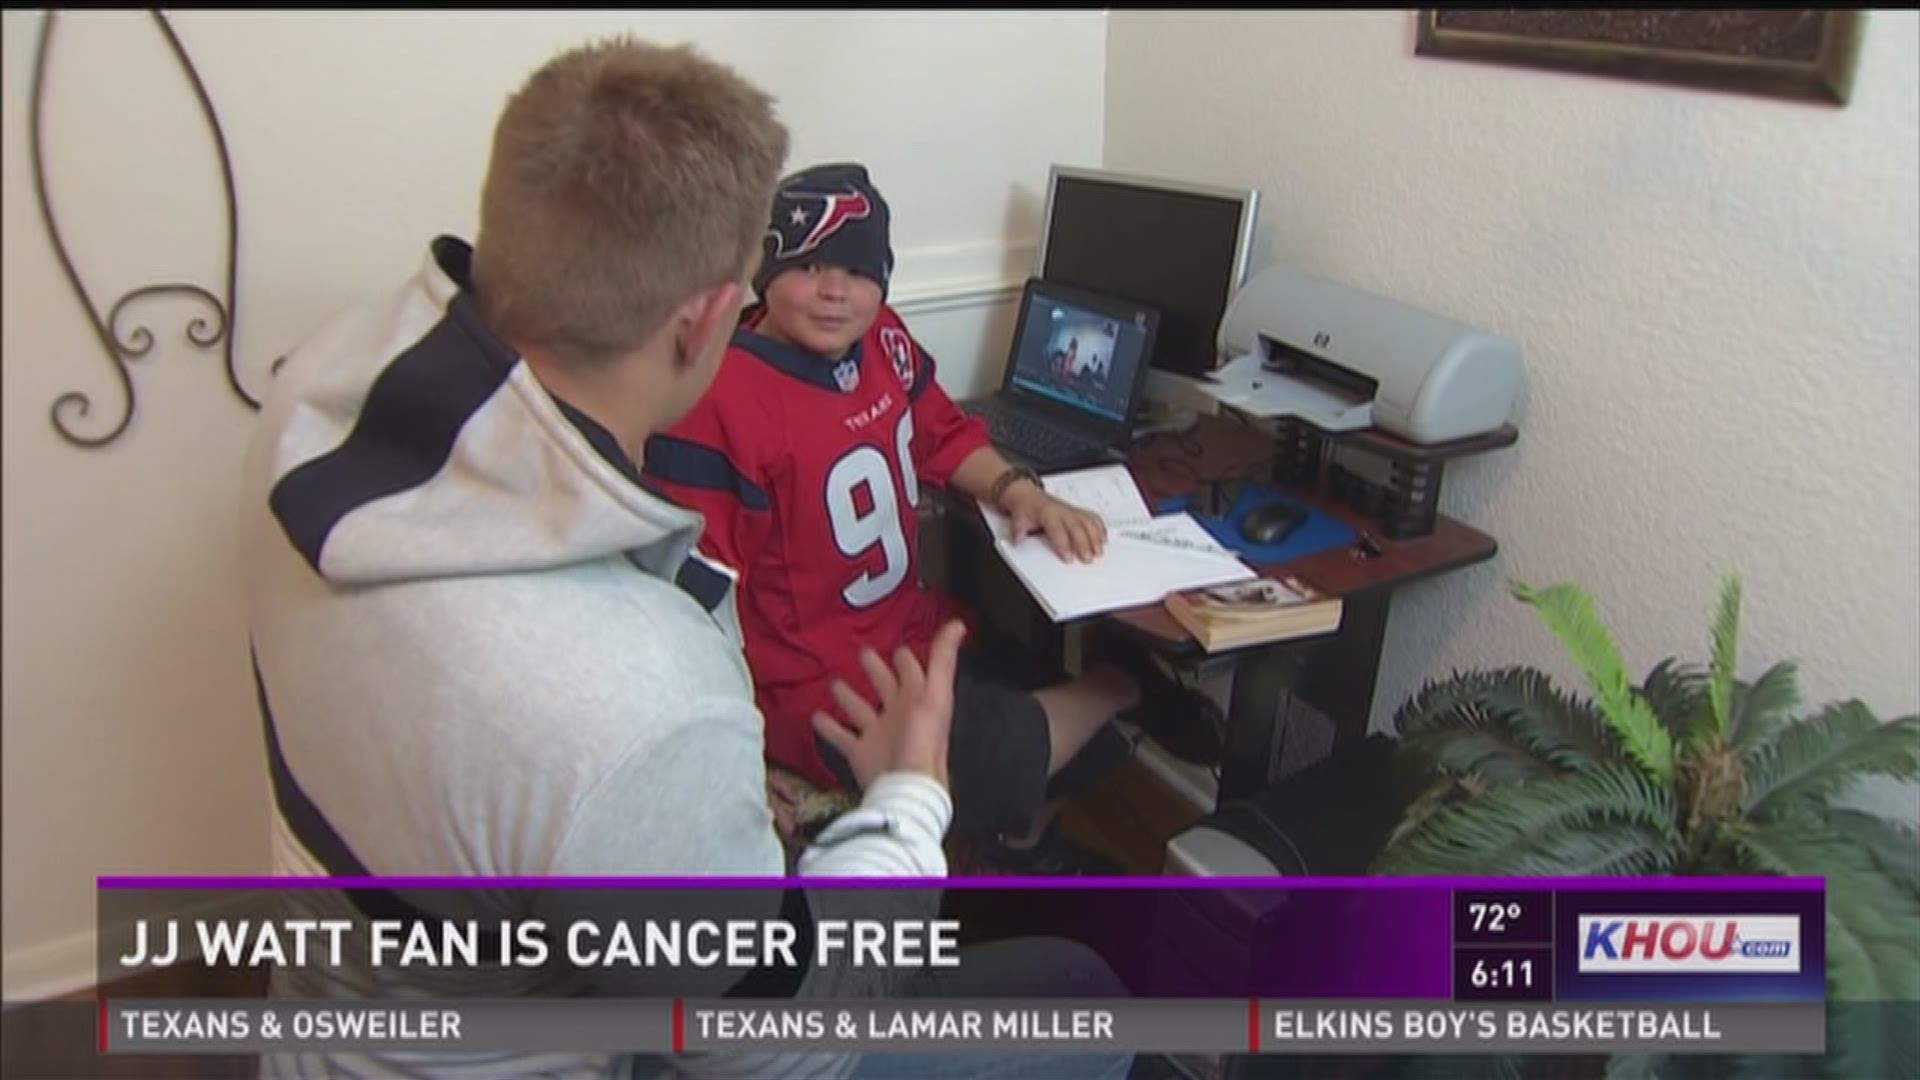 J.J. Watt surprised him back in 2013 with a special visit to his home. Cristian Beasley says it helped save his life.